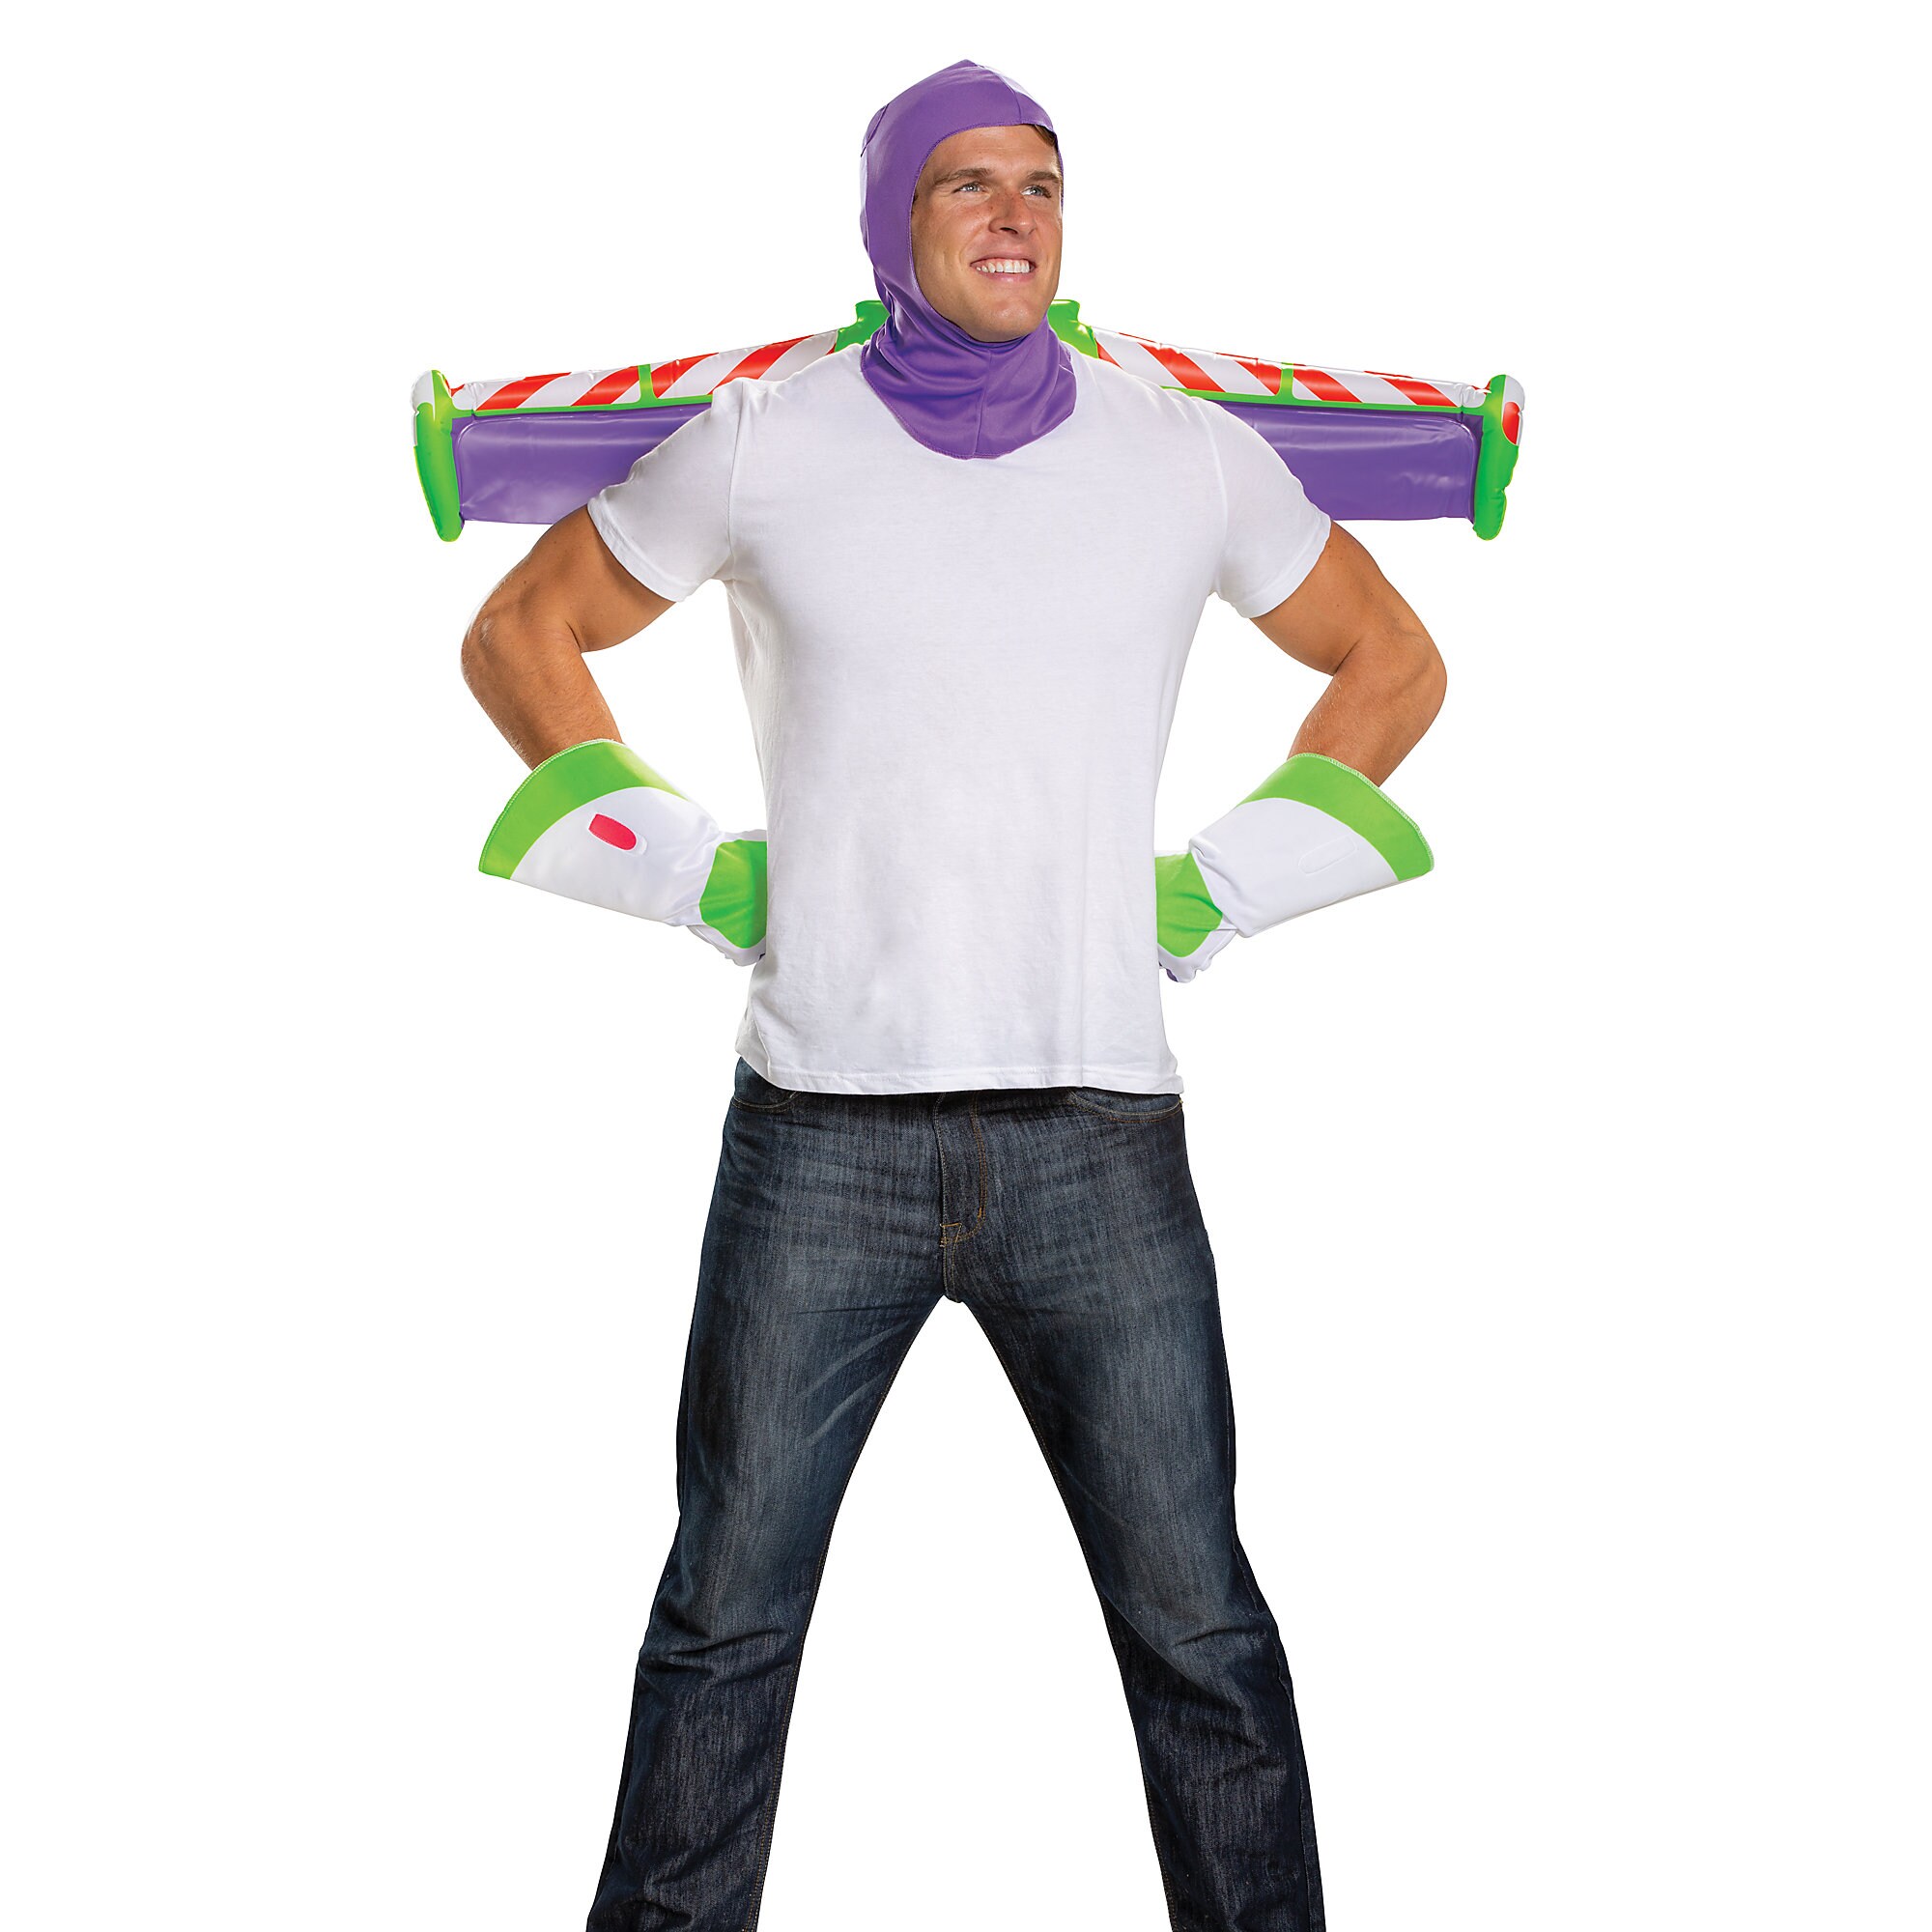 Buzz Lightyear Deluxe Costume Accessory Kit for Adults by Disguise released...